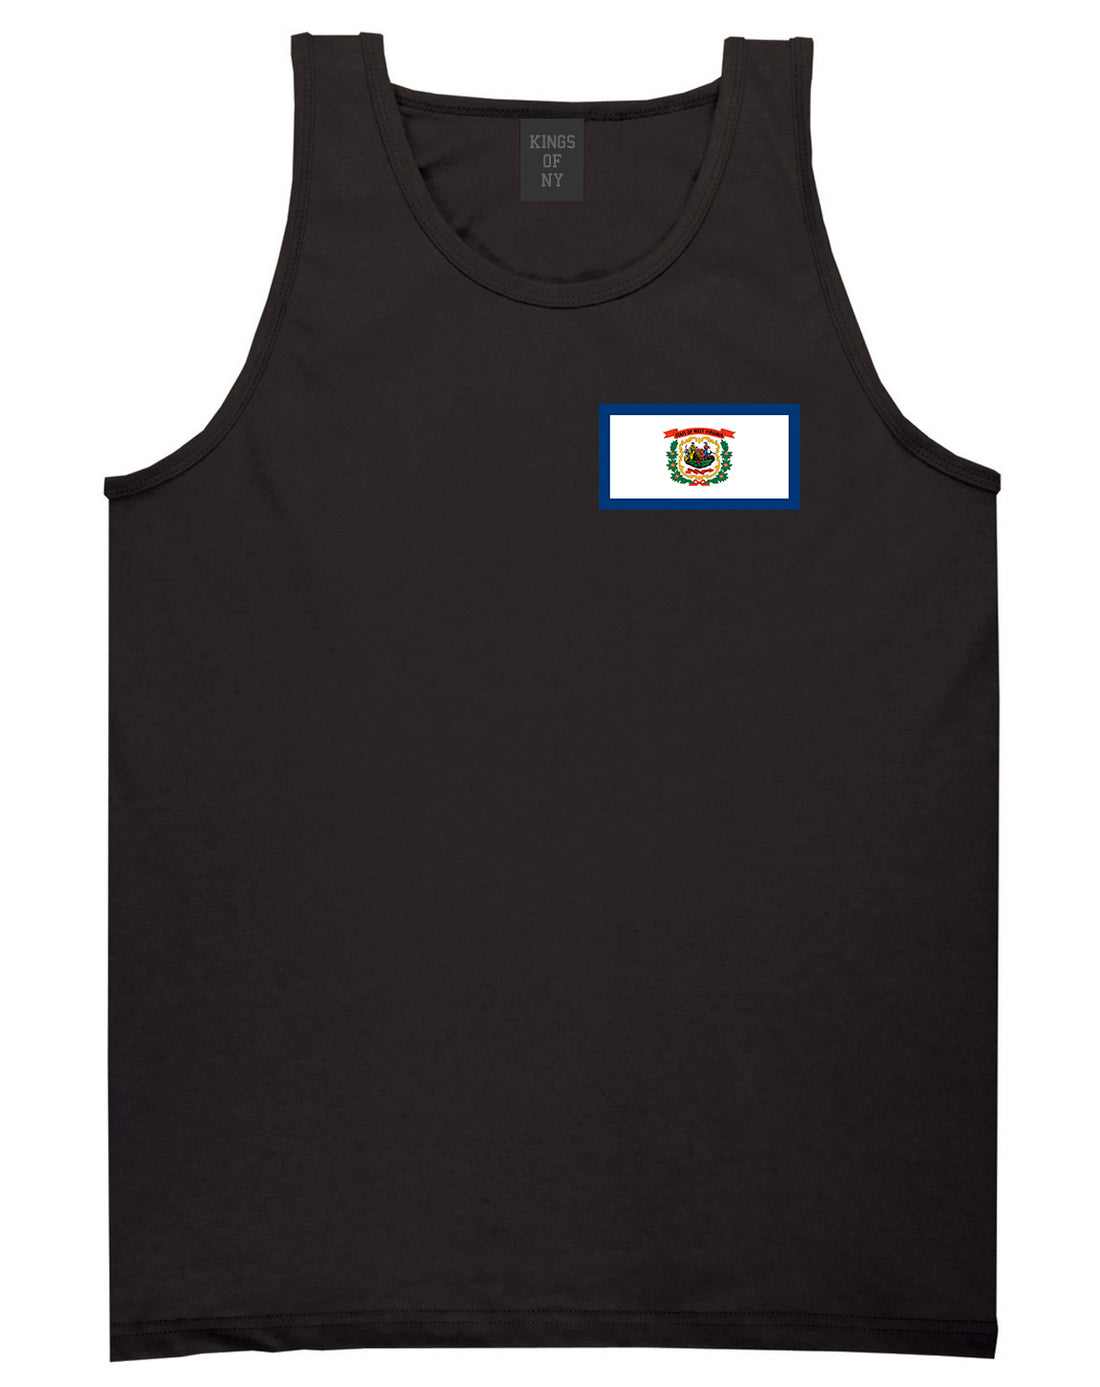 West Virginia State Flag WV Chest Mens Tank Top T-Shirt Black